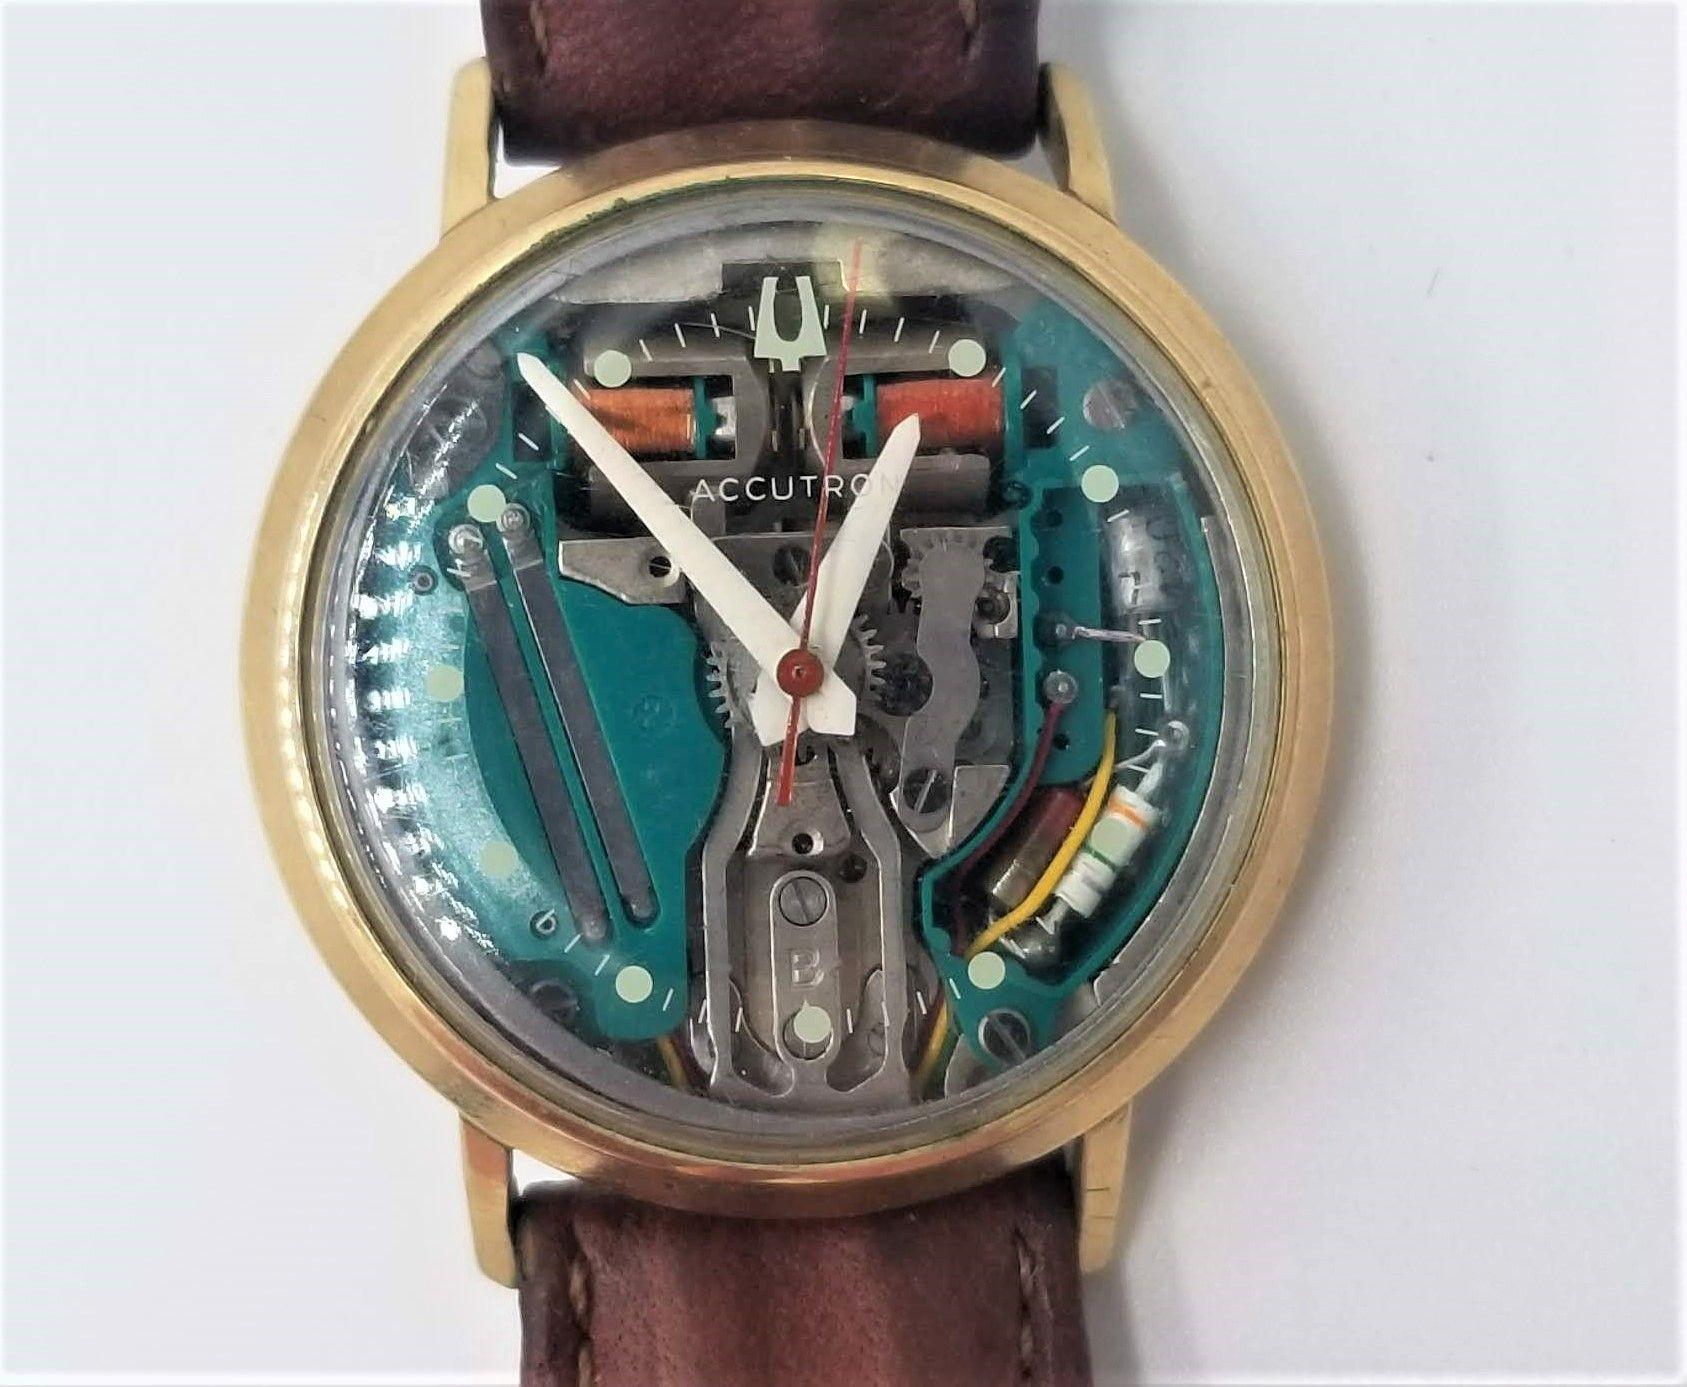 The 1965 Men's Accutron 214 Spaceview Openwork Wristwatch was a revolutionary timepiece featuring cutting-edge tuning fork technology, setting a new standard for accuracy in the industry by Bulova watches.

The Spaceview wristwatch was never